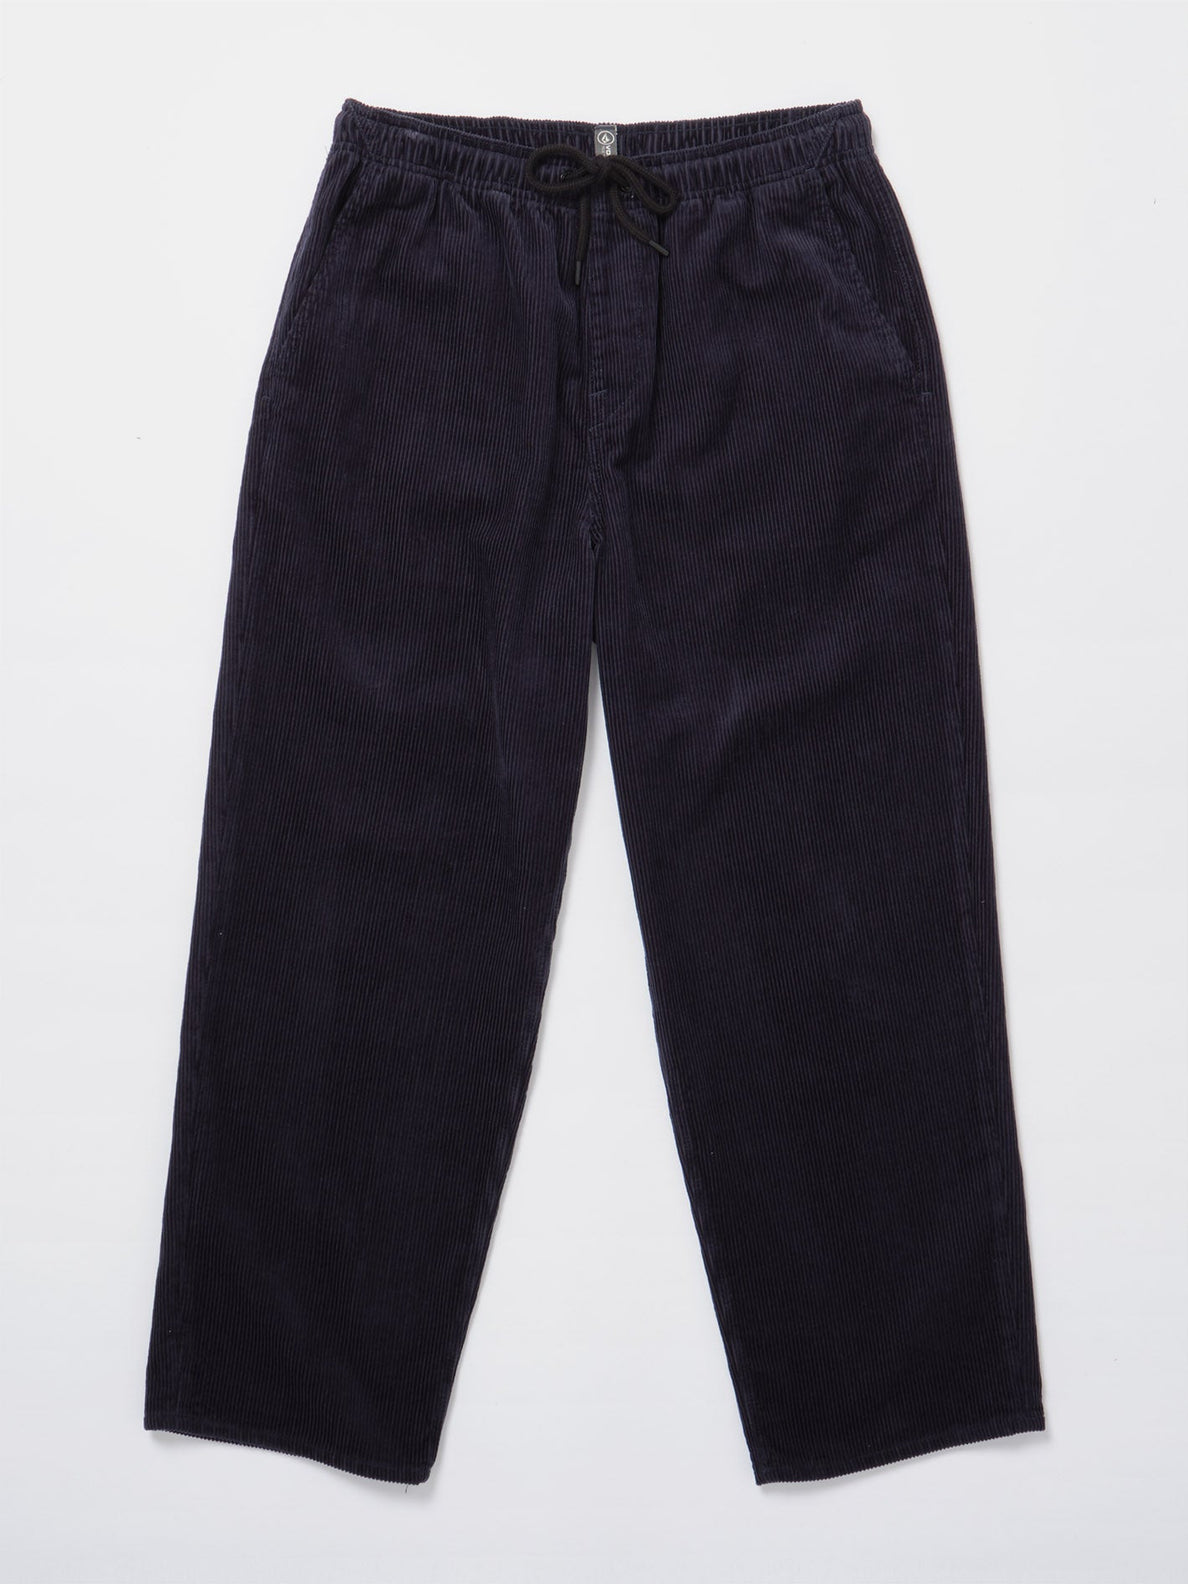 OUTER SPACED CASUAL PANT (A1212306_DNV) [2]